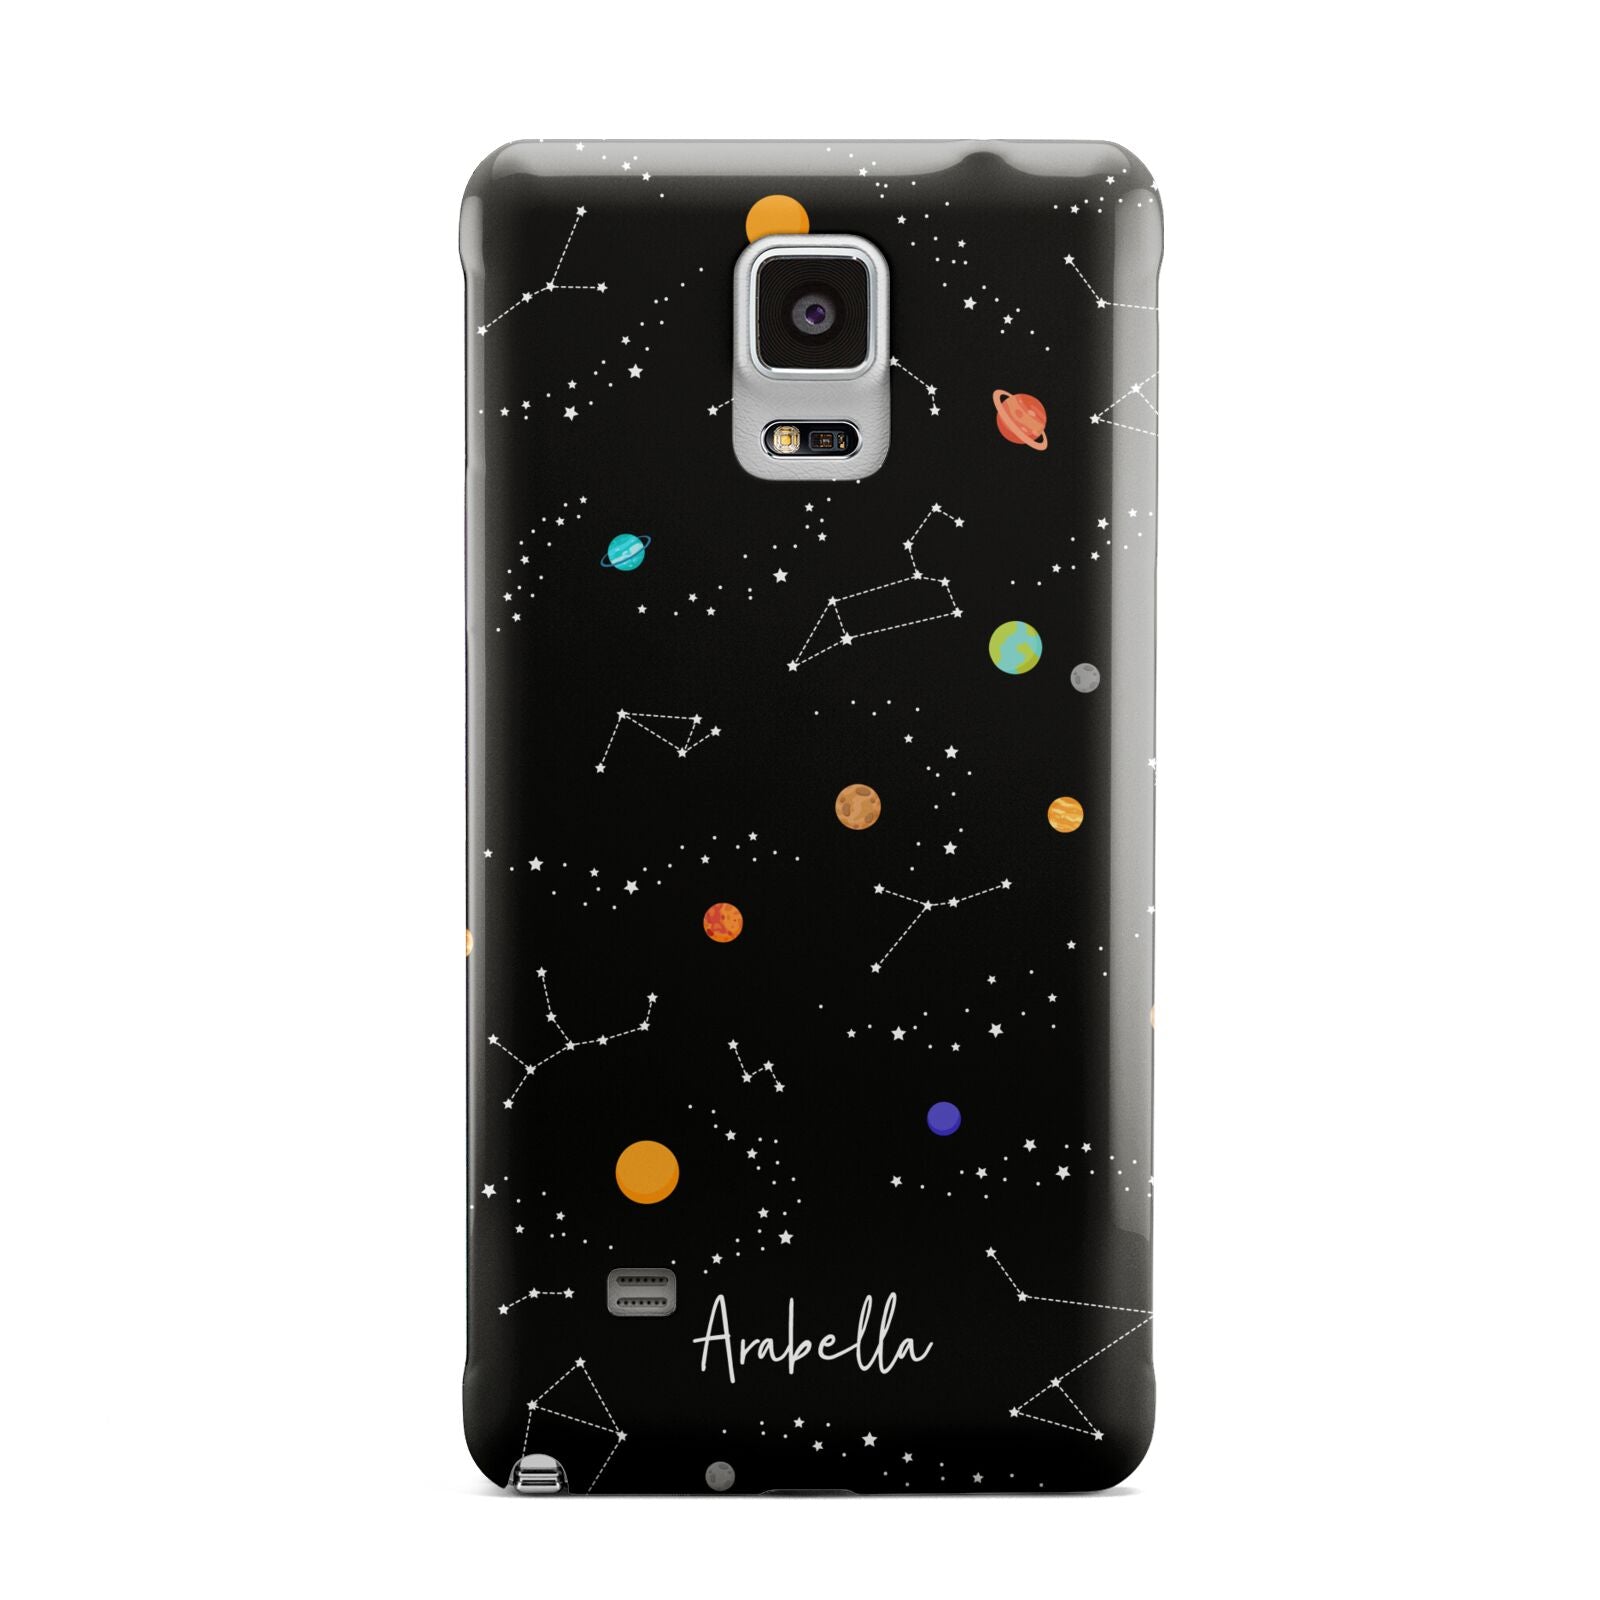 Galaxy Scene with Name Samsung Galaxy Note 4 Case